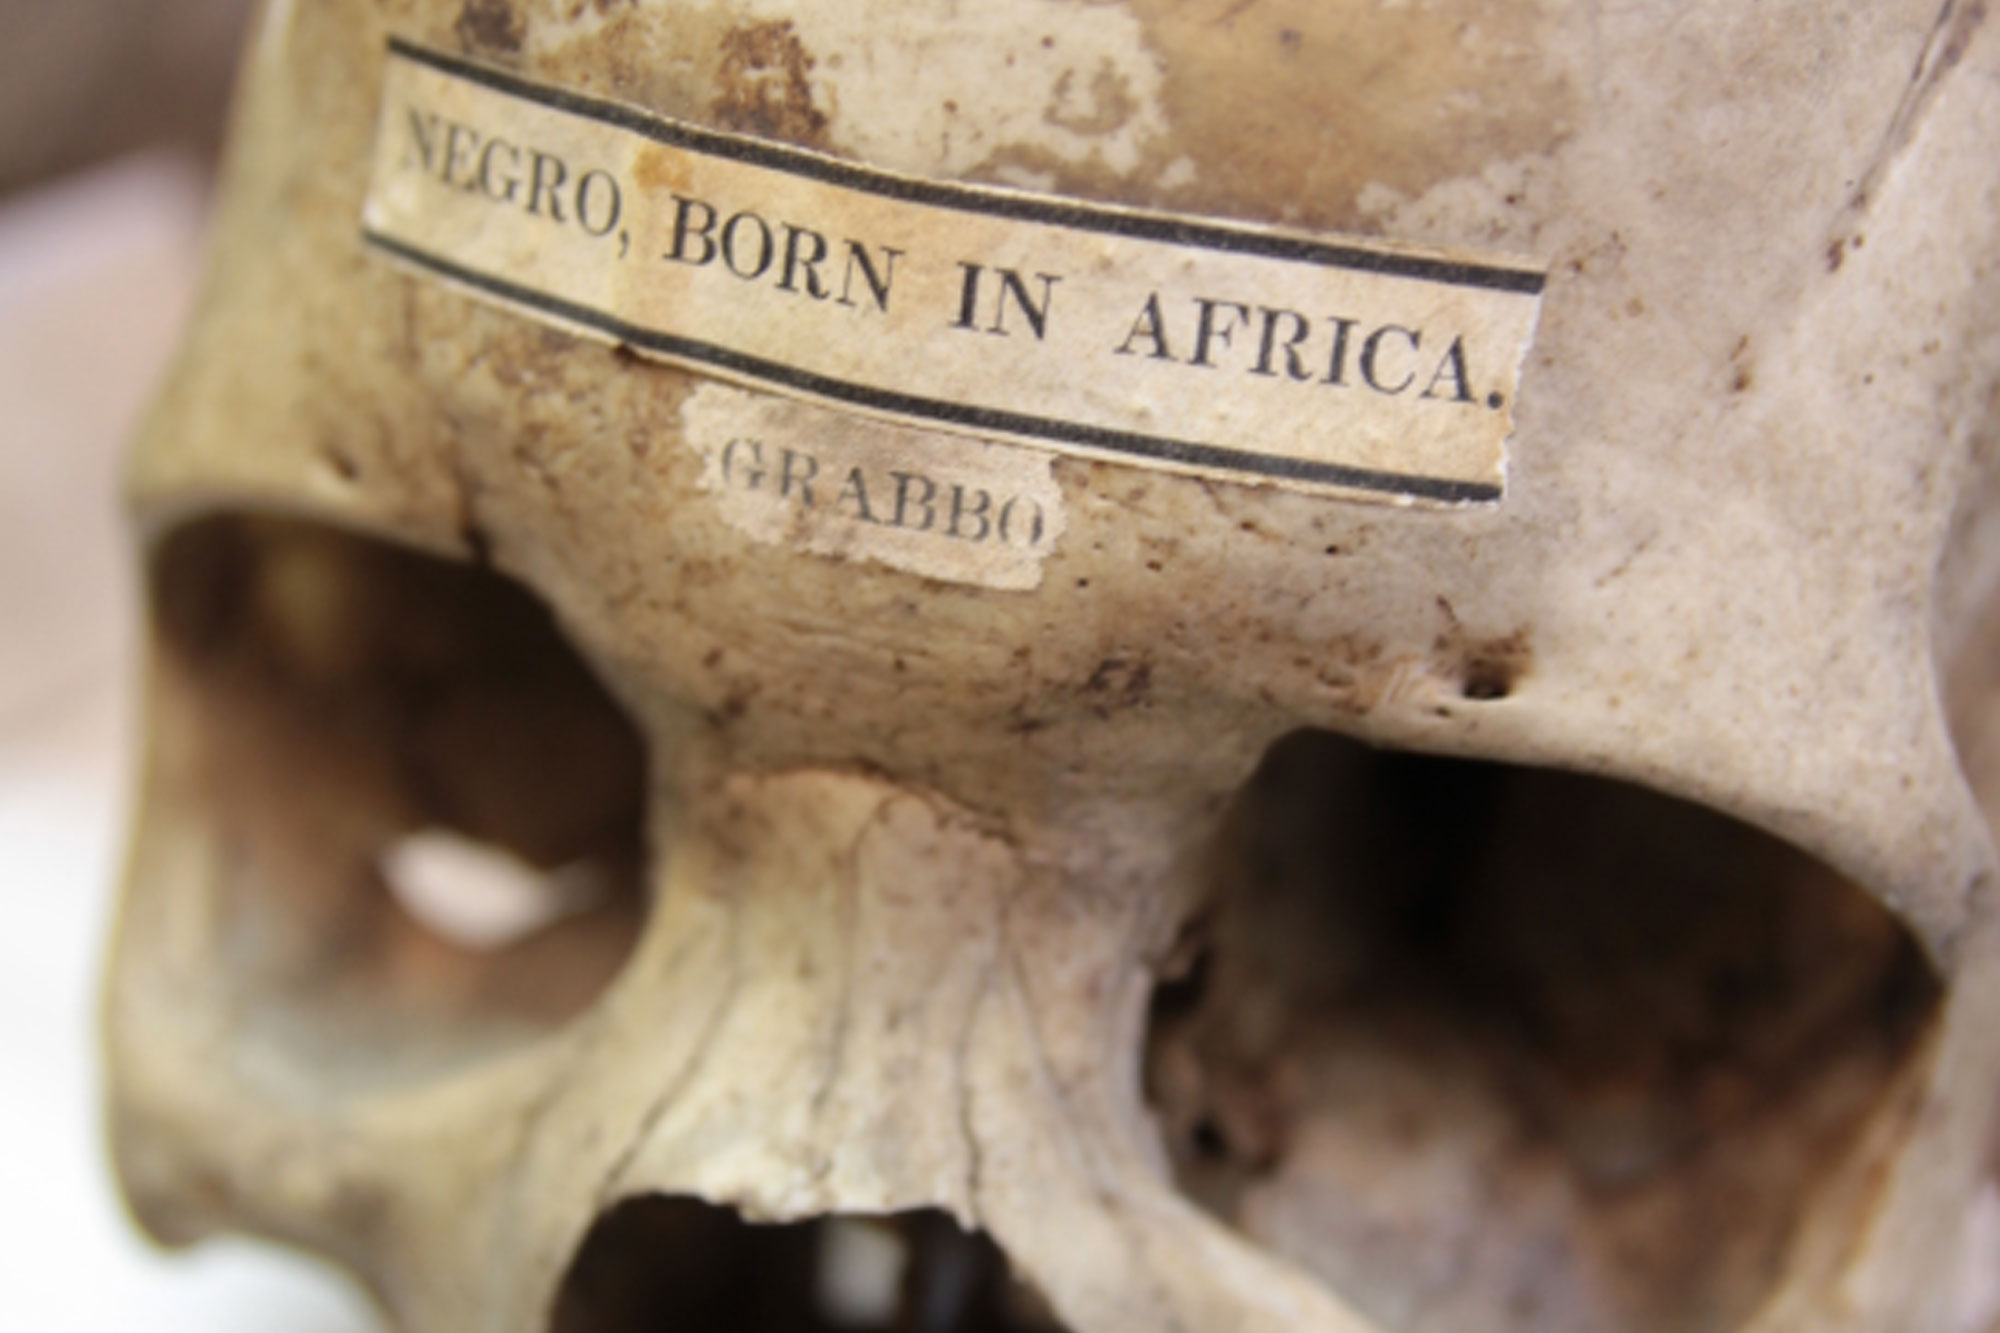 Skull with label across its forehead reading 'Negro - Born in Africa'